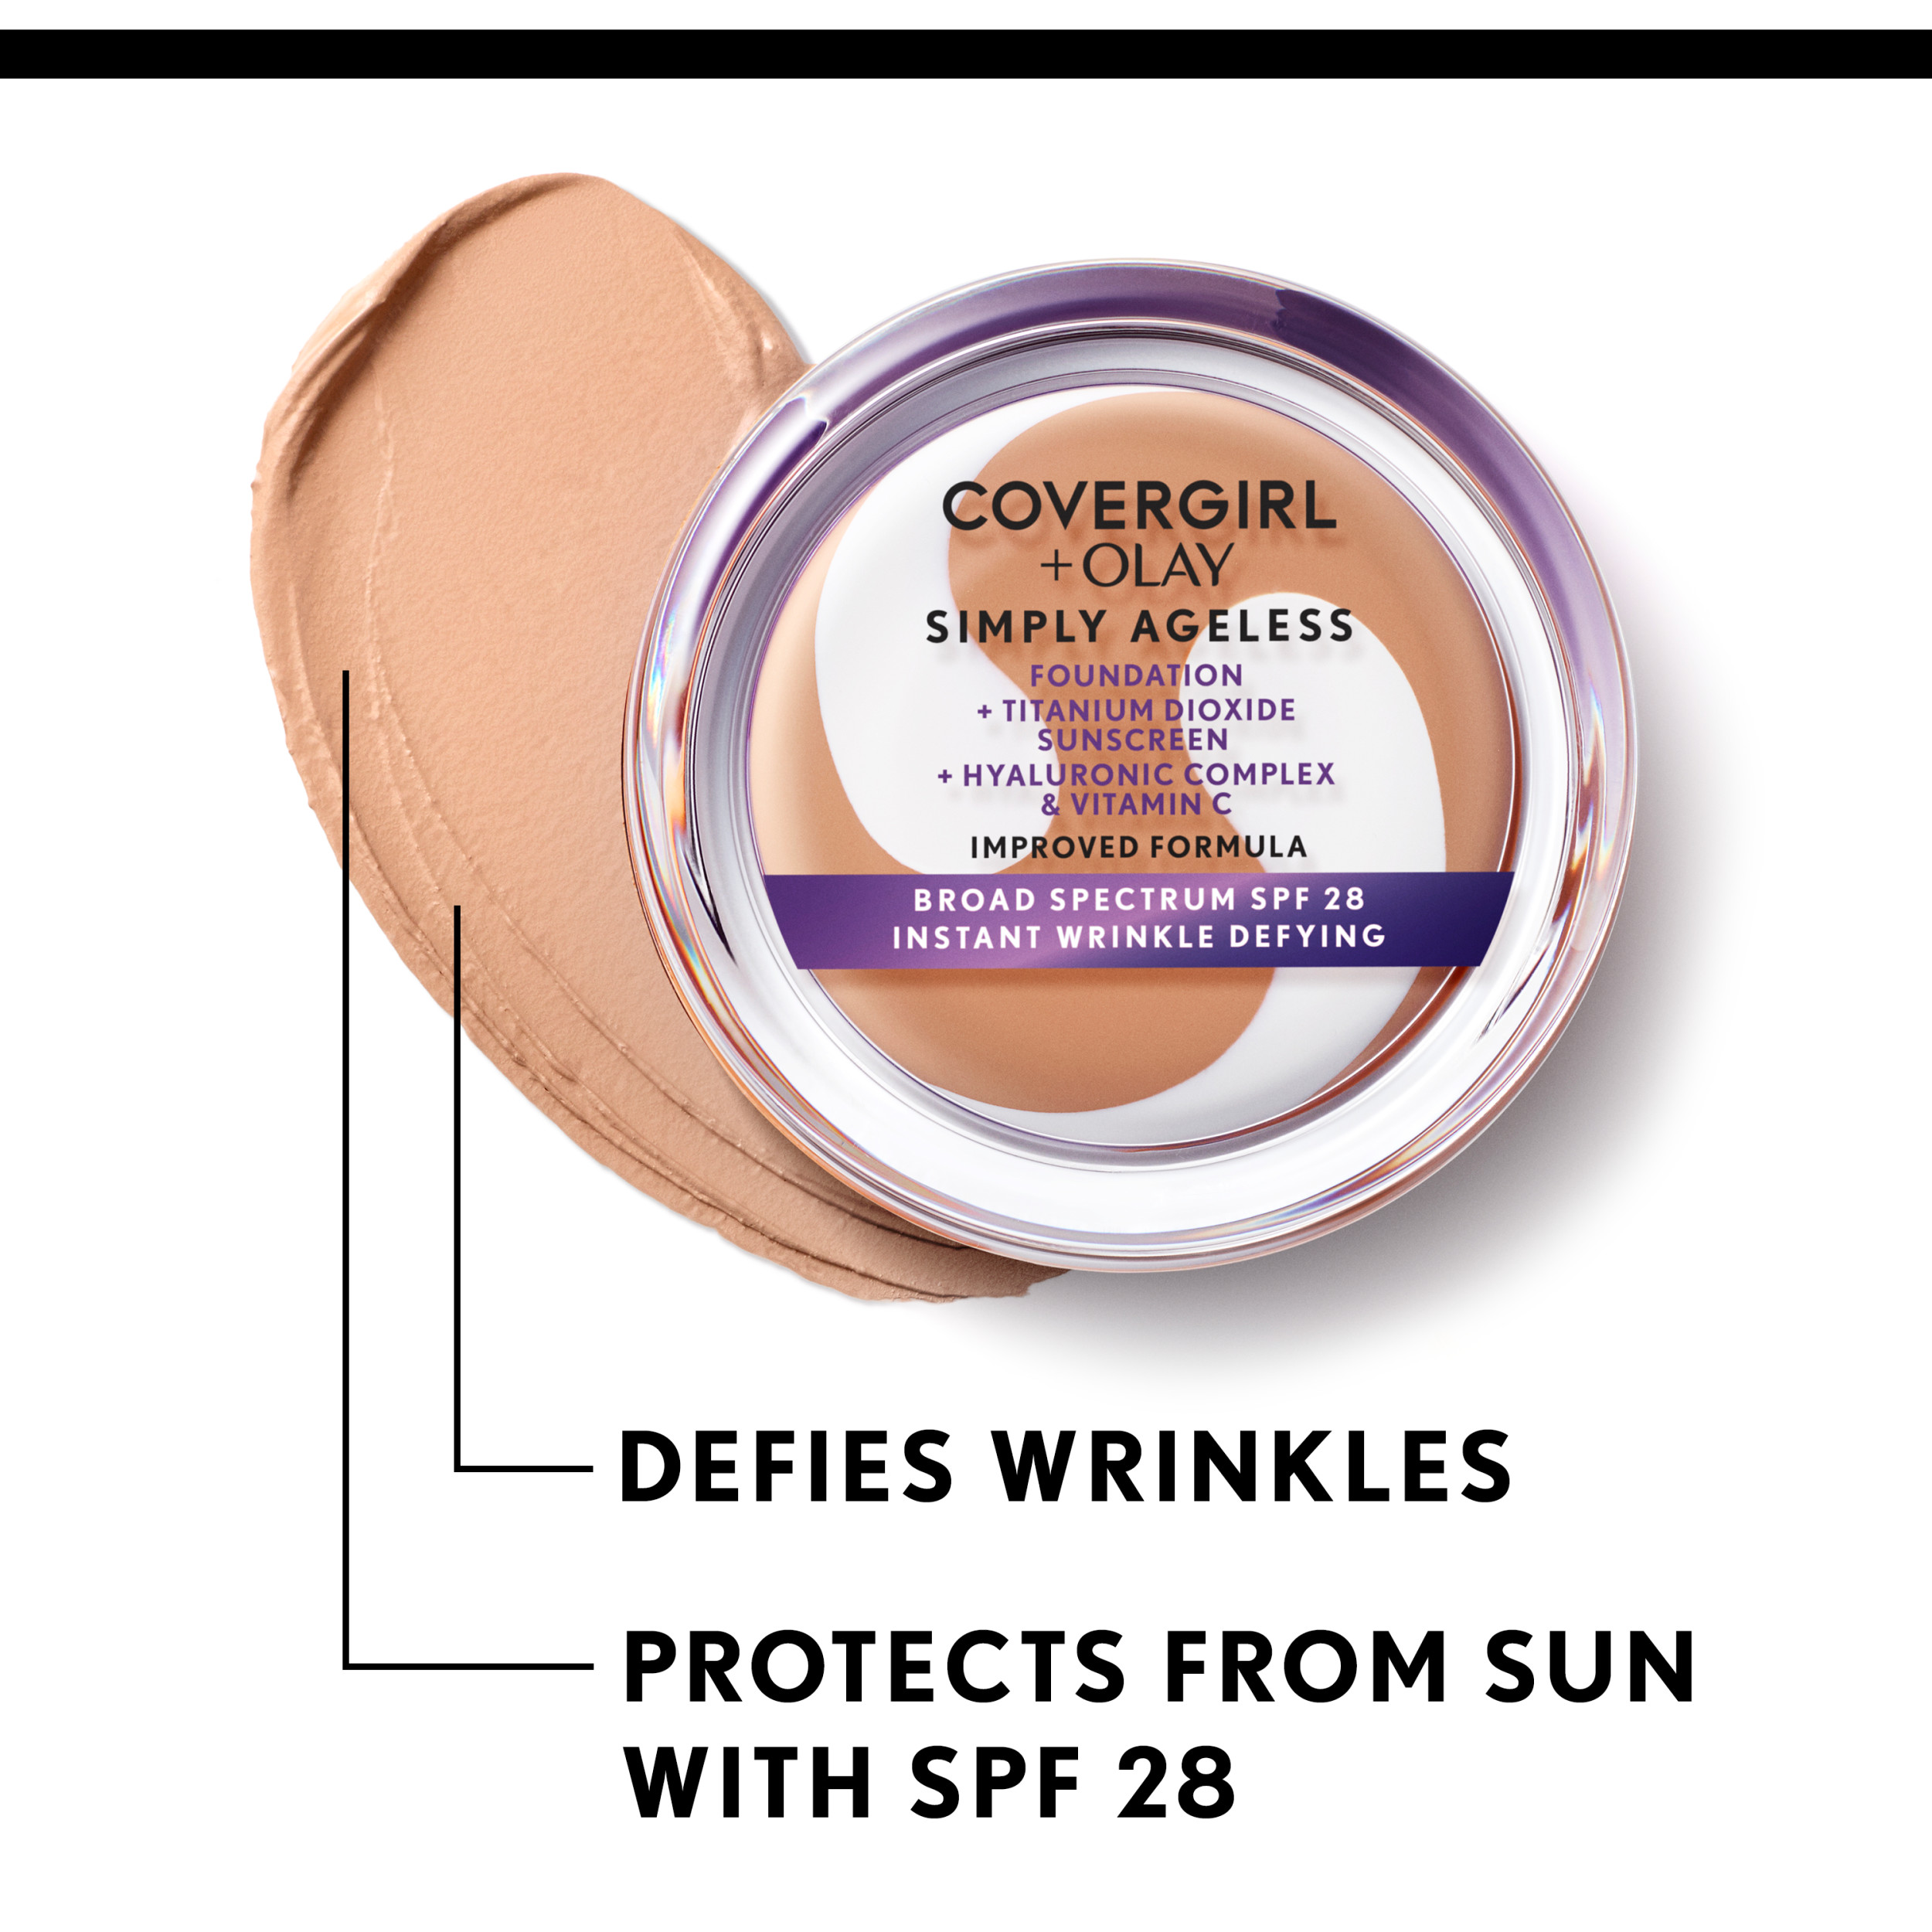 COVERGIRL + OLAY Simply Ageless Instant Wrinkle-Defying Foundation with SPF 28, Medium Light, 0.44 oz - image 4 of 9